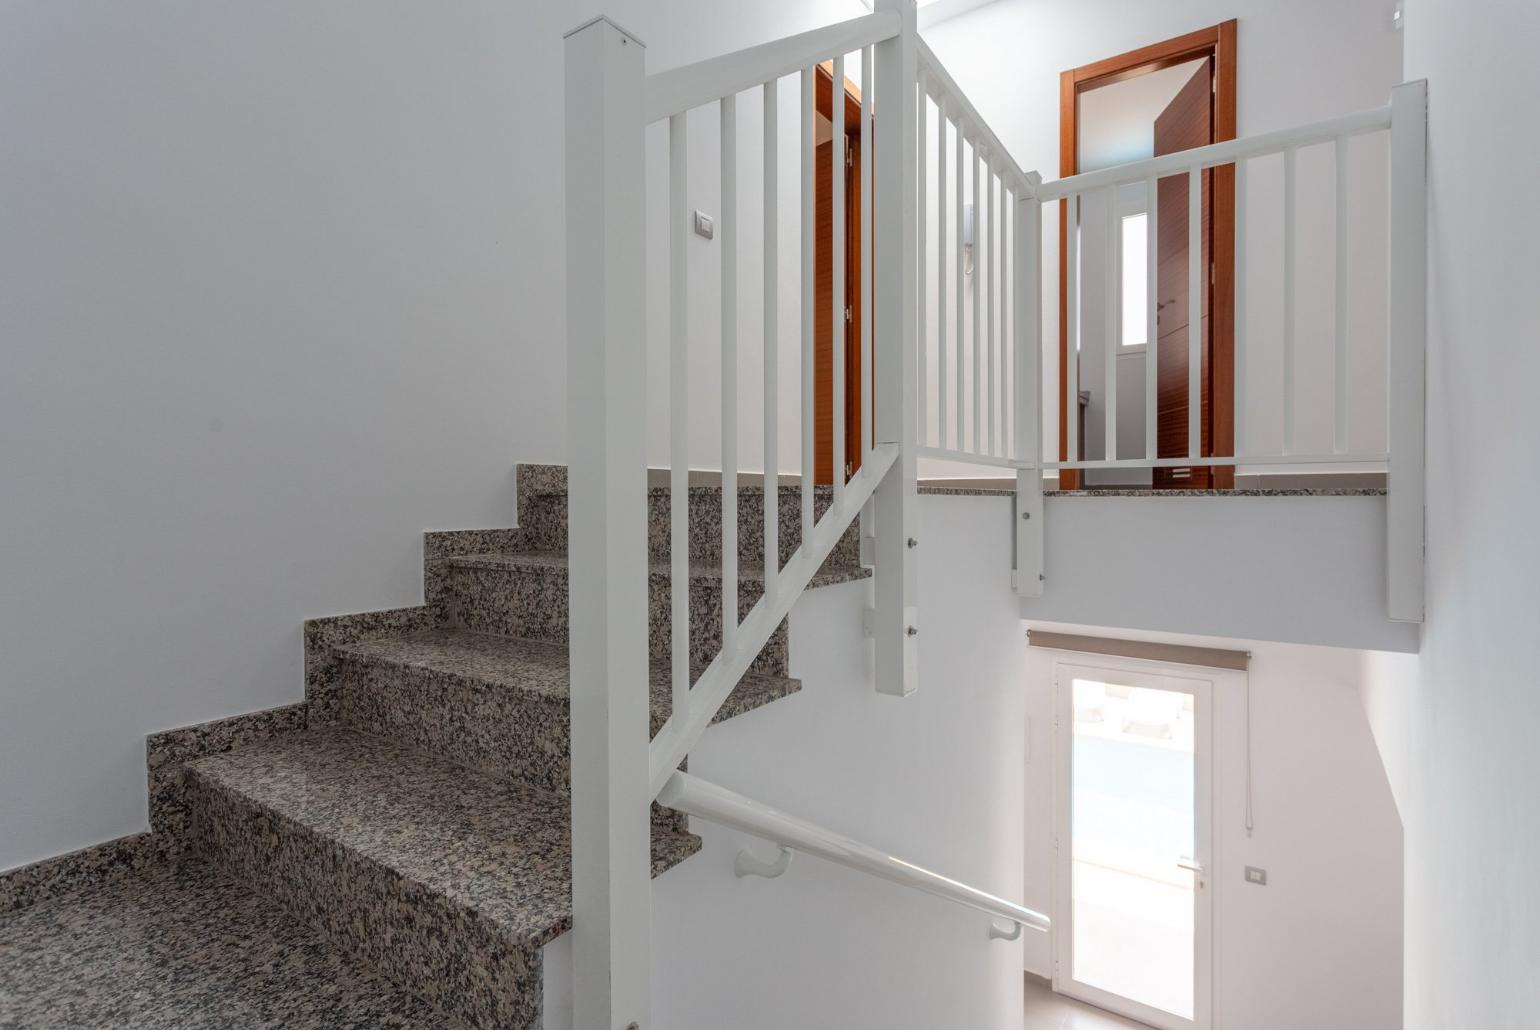 Stairs for the second floor 